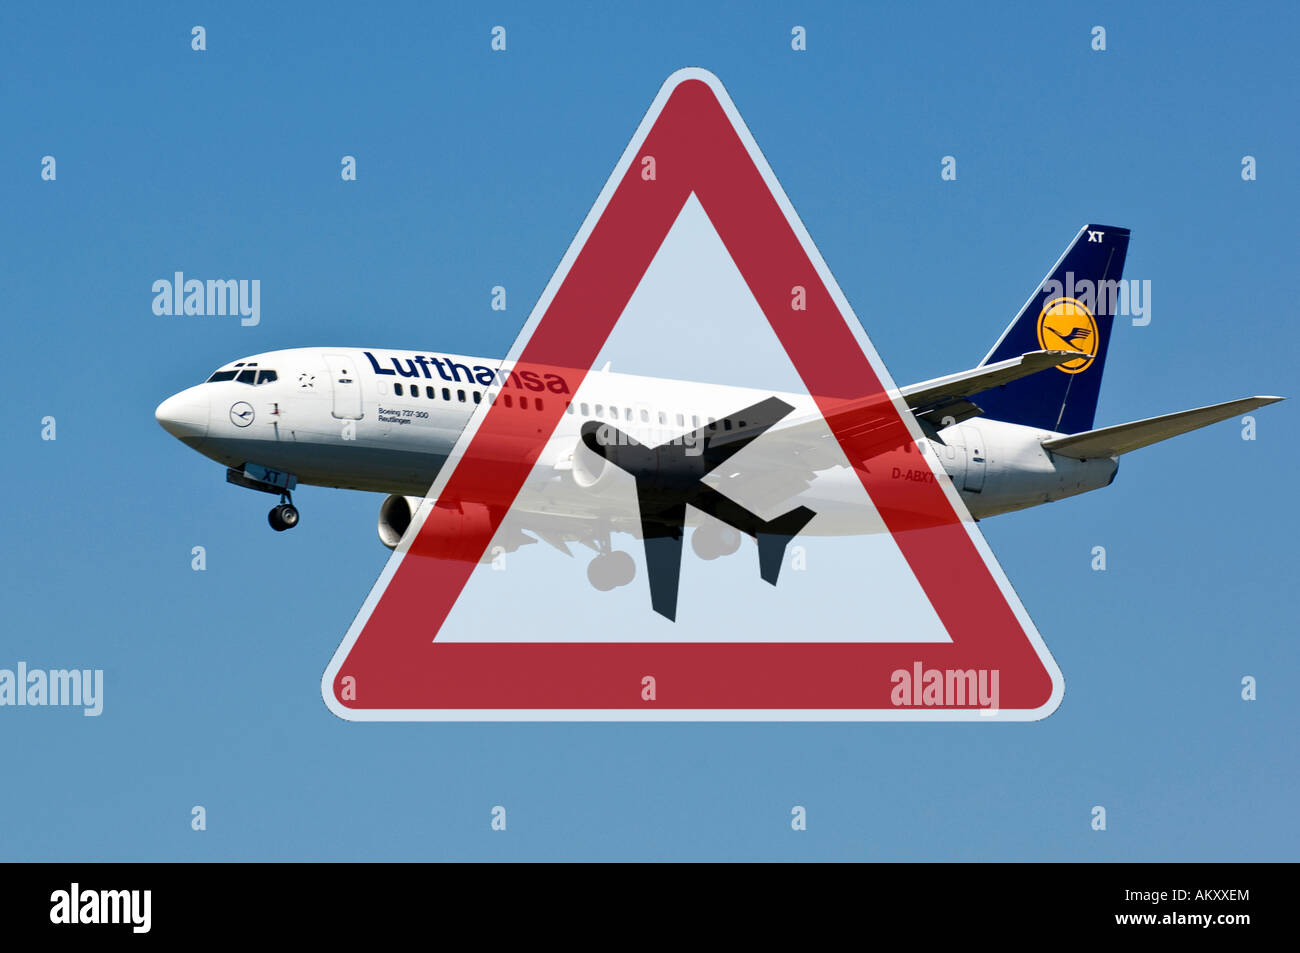 Air traffic, noise pollution Stock Photo